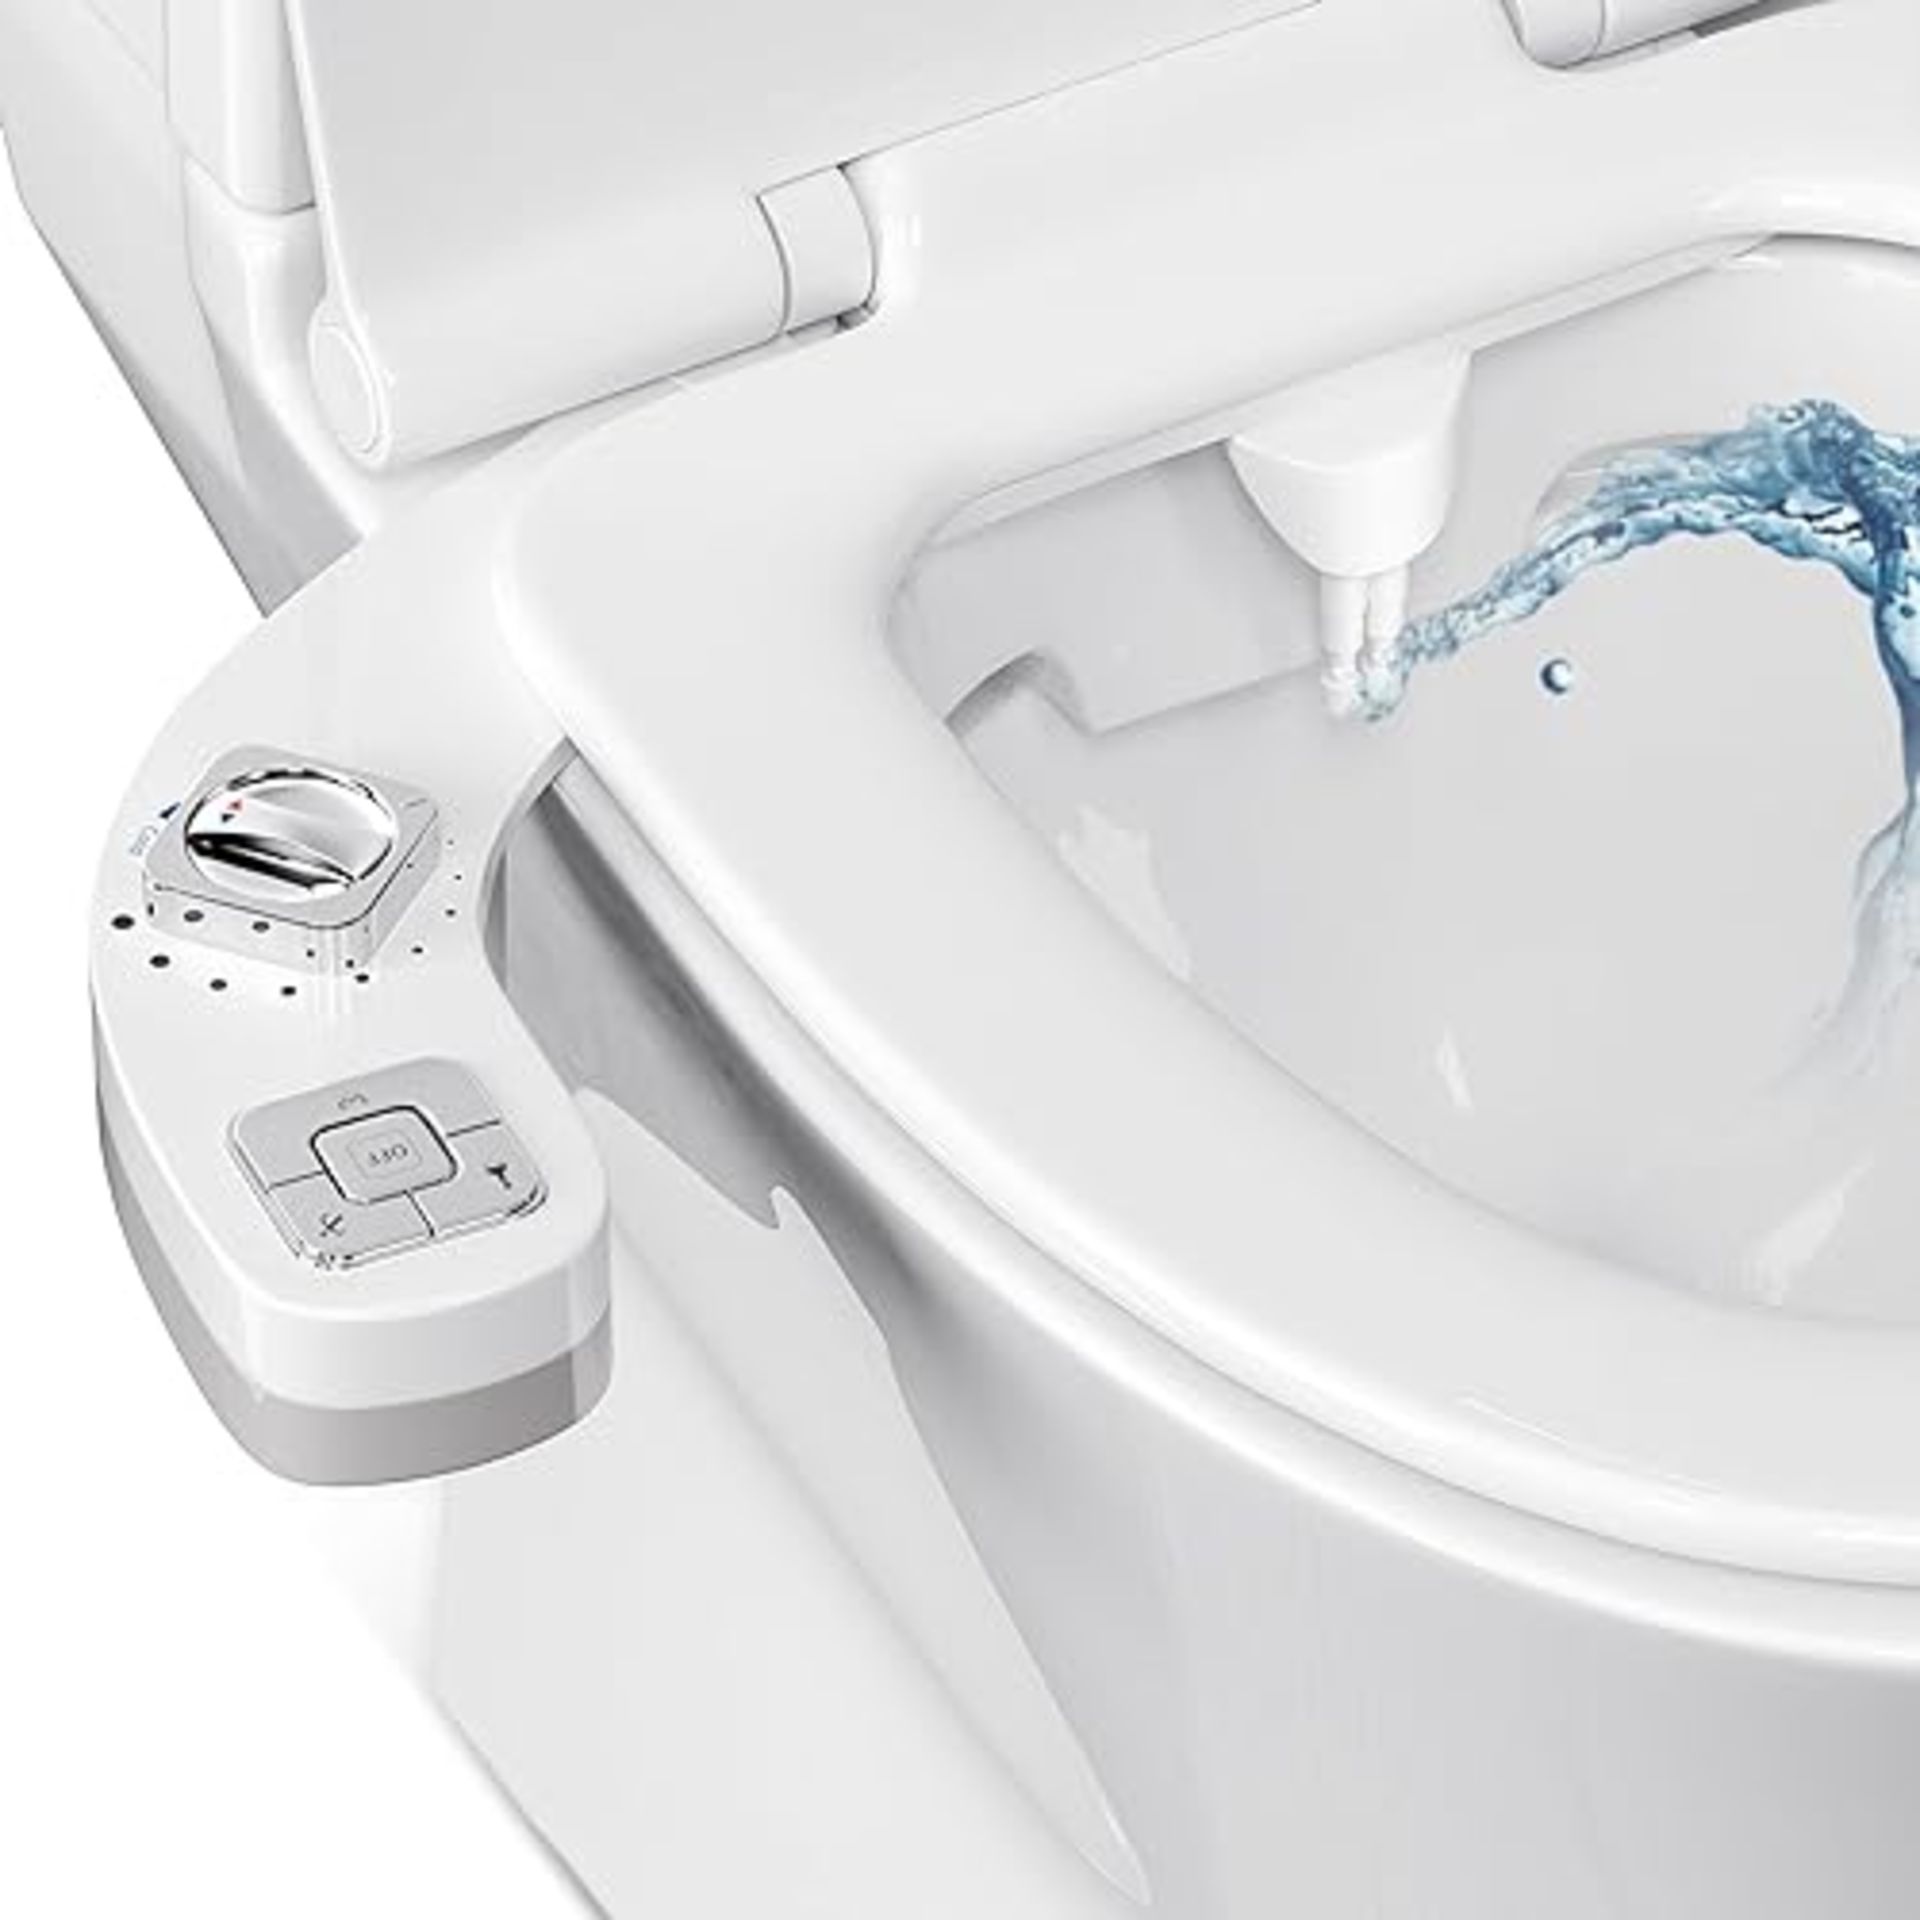 Couleeur Bidet Attachment for Toilet UK,Non-Electric Hot and Cold Water Bidet with Self-Cleaning Du